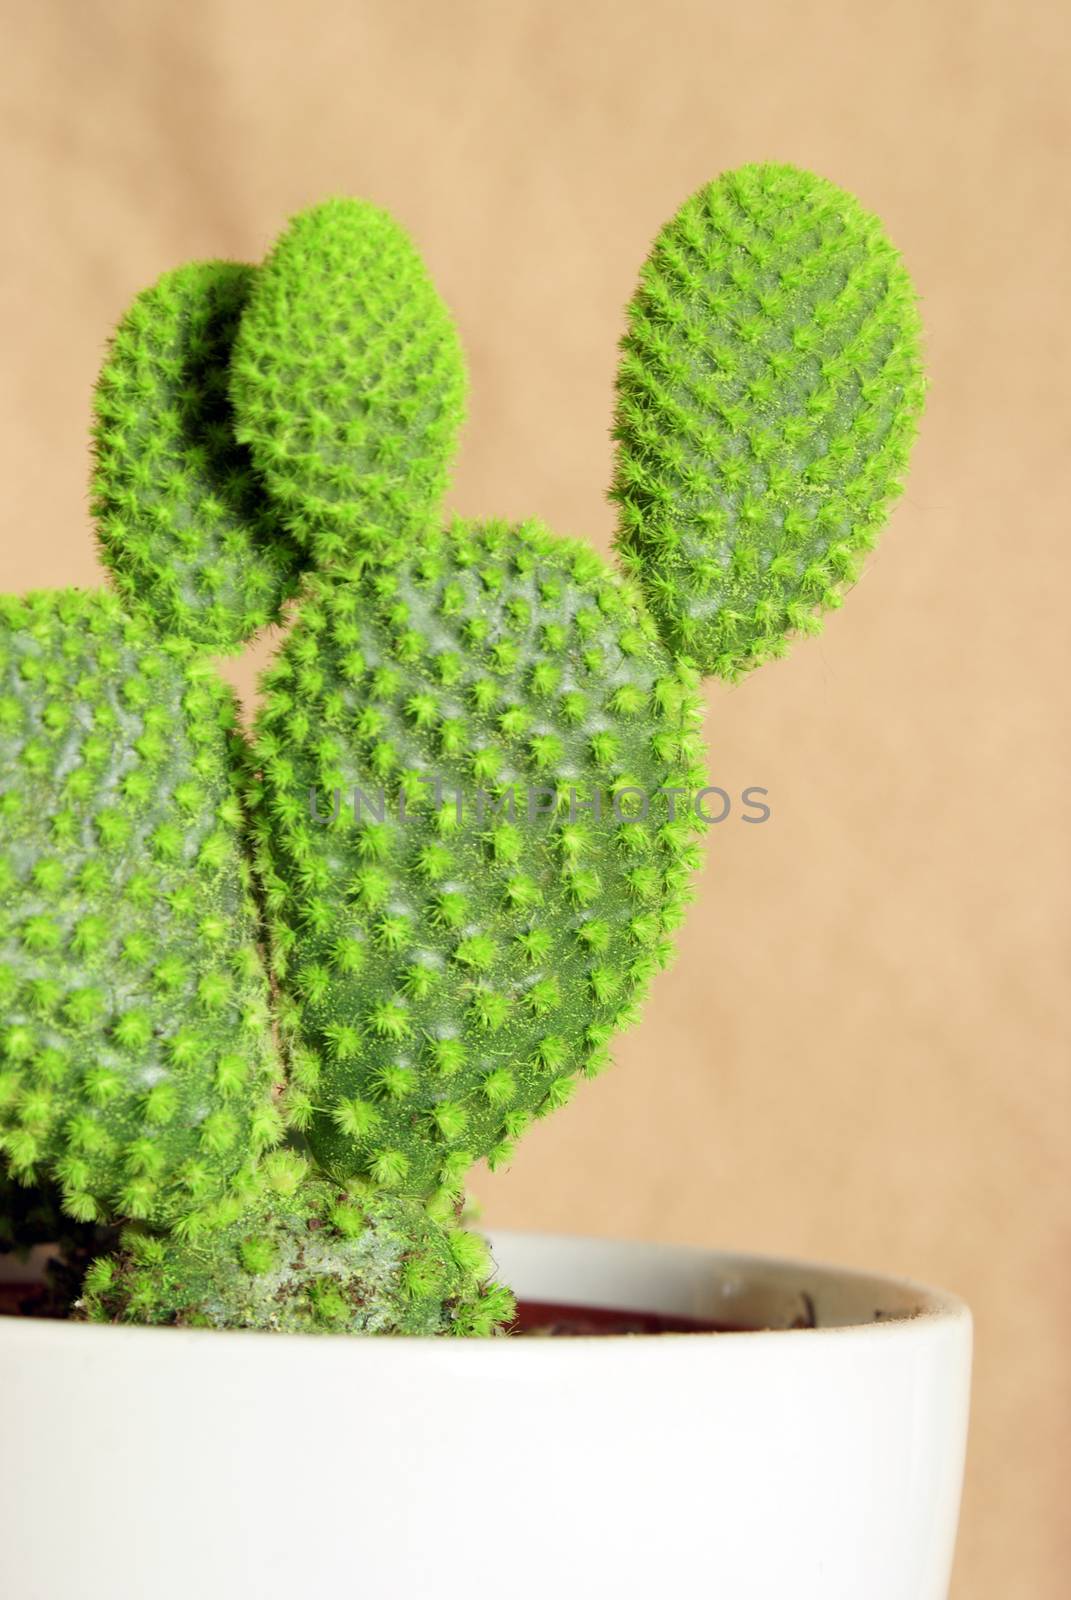 Potted Cactus Houseplant by AlphaBaby